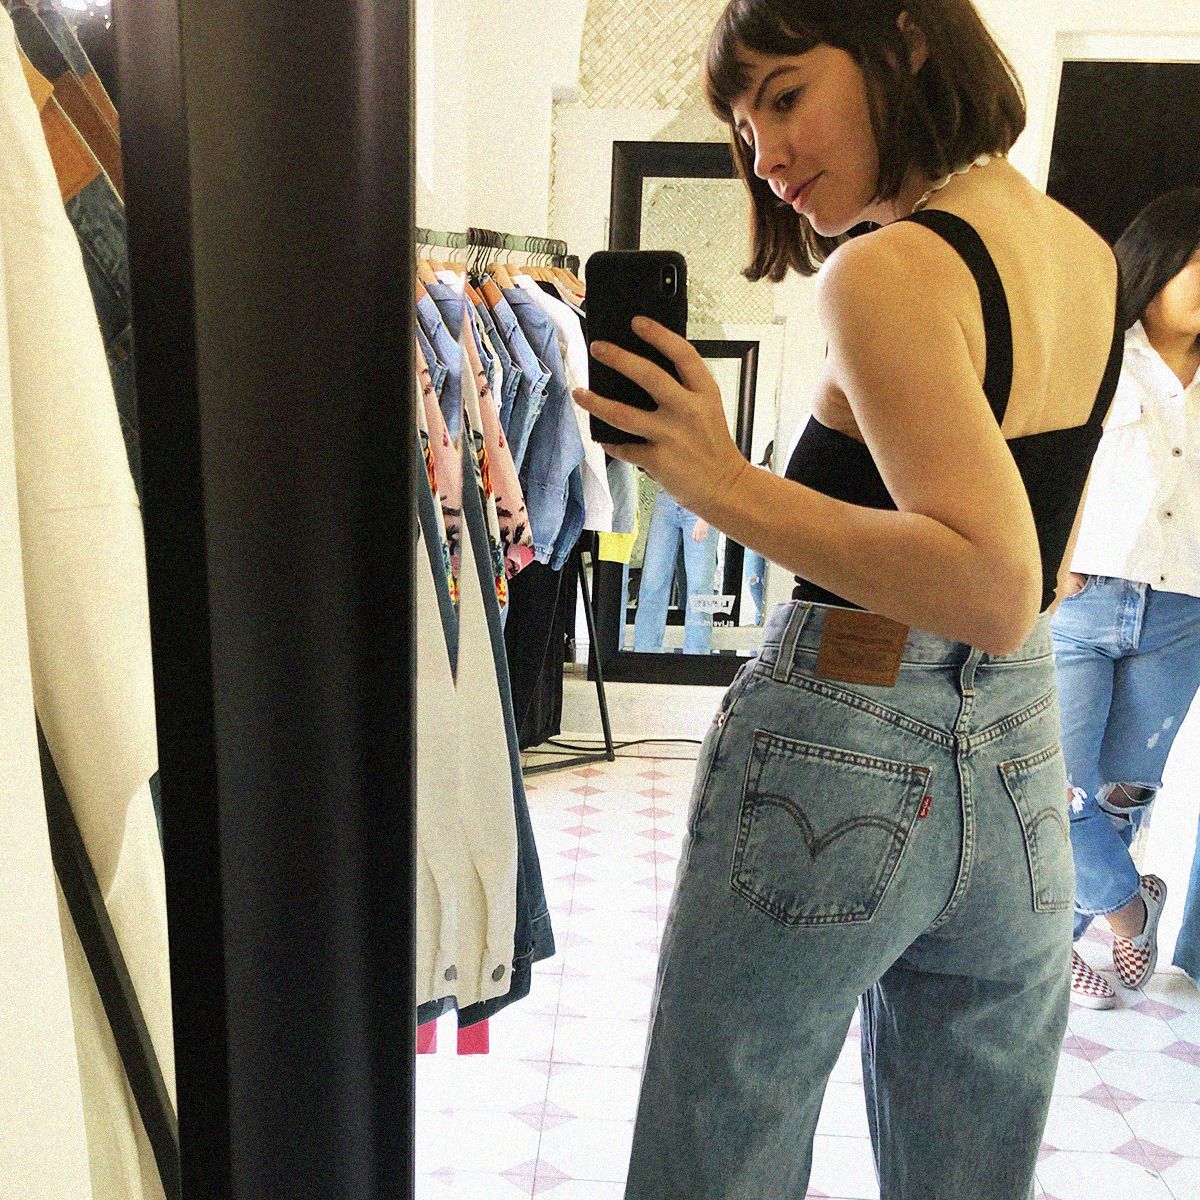 All The Levi's Tried & Compared: 501s, Wedgie Fit, Ribcage & 700 Series -  The Mom Edit